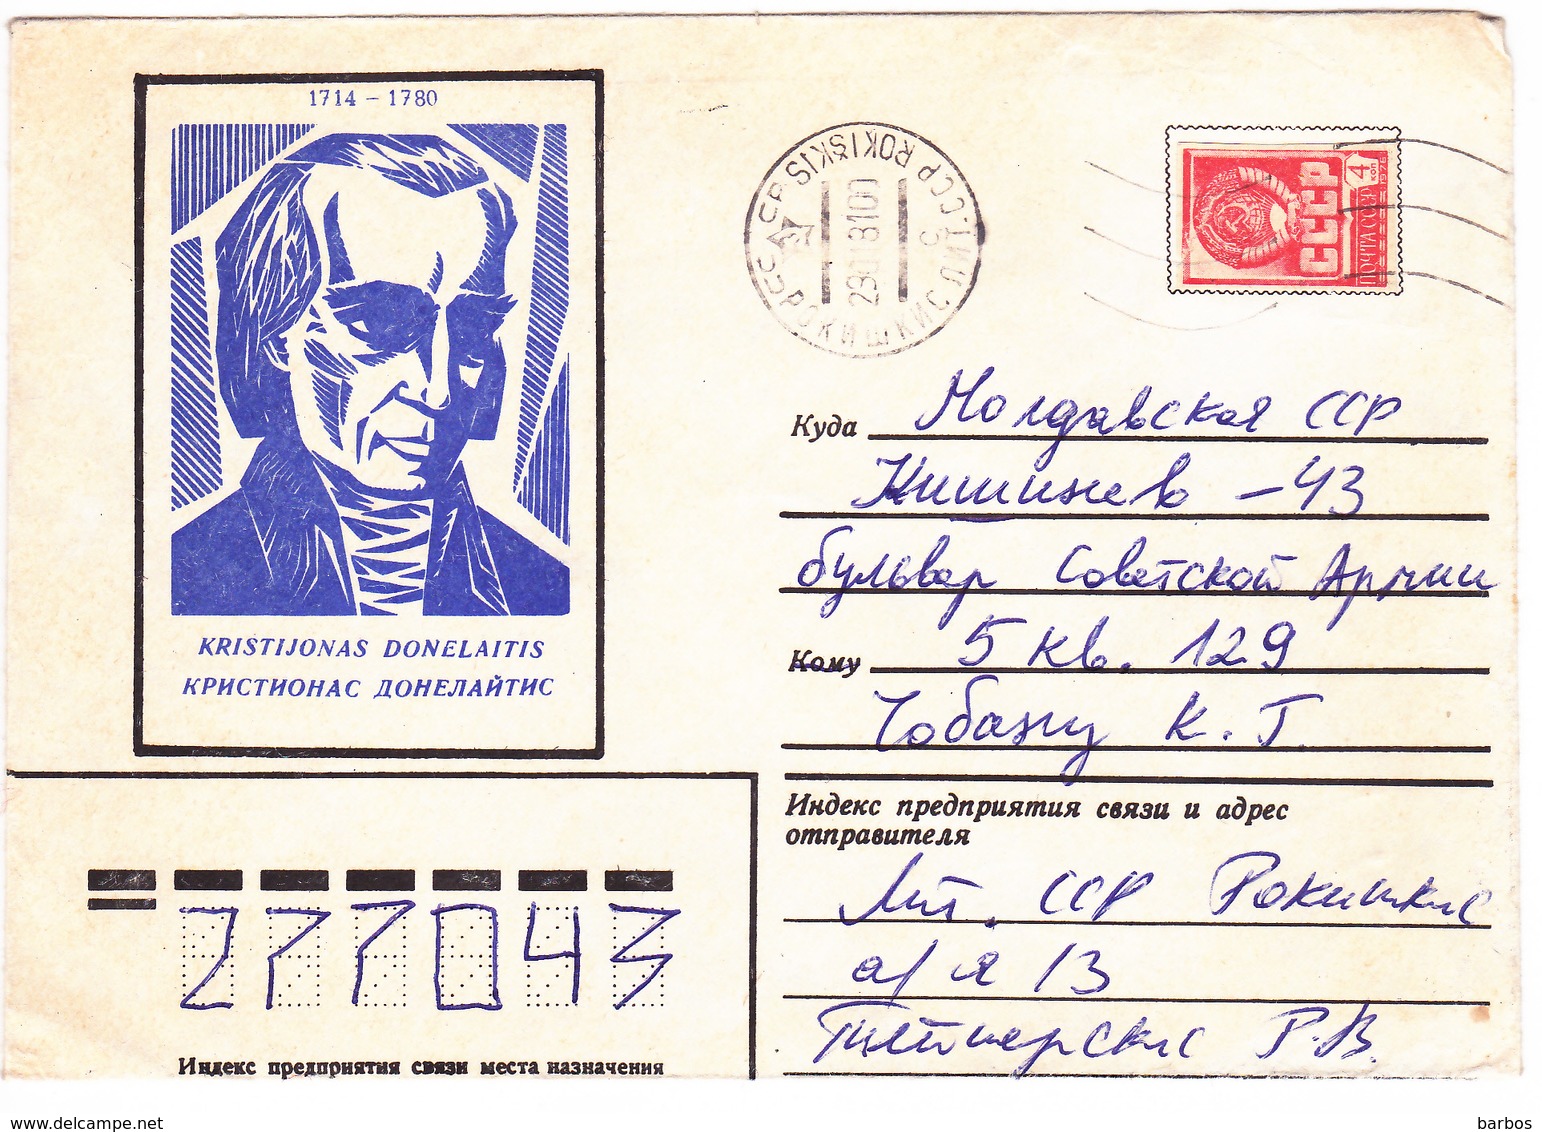 1981, URSS Lituanie  To Moldova , Kristijonas Donelaitis , Rokiskis Postal Cancell , Used Cover - Collections (with Albums)